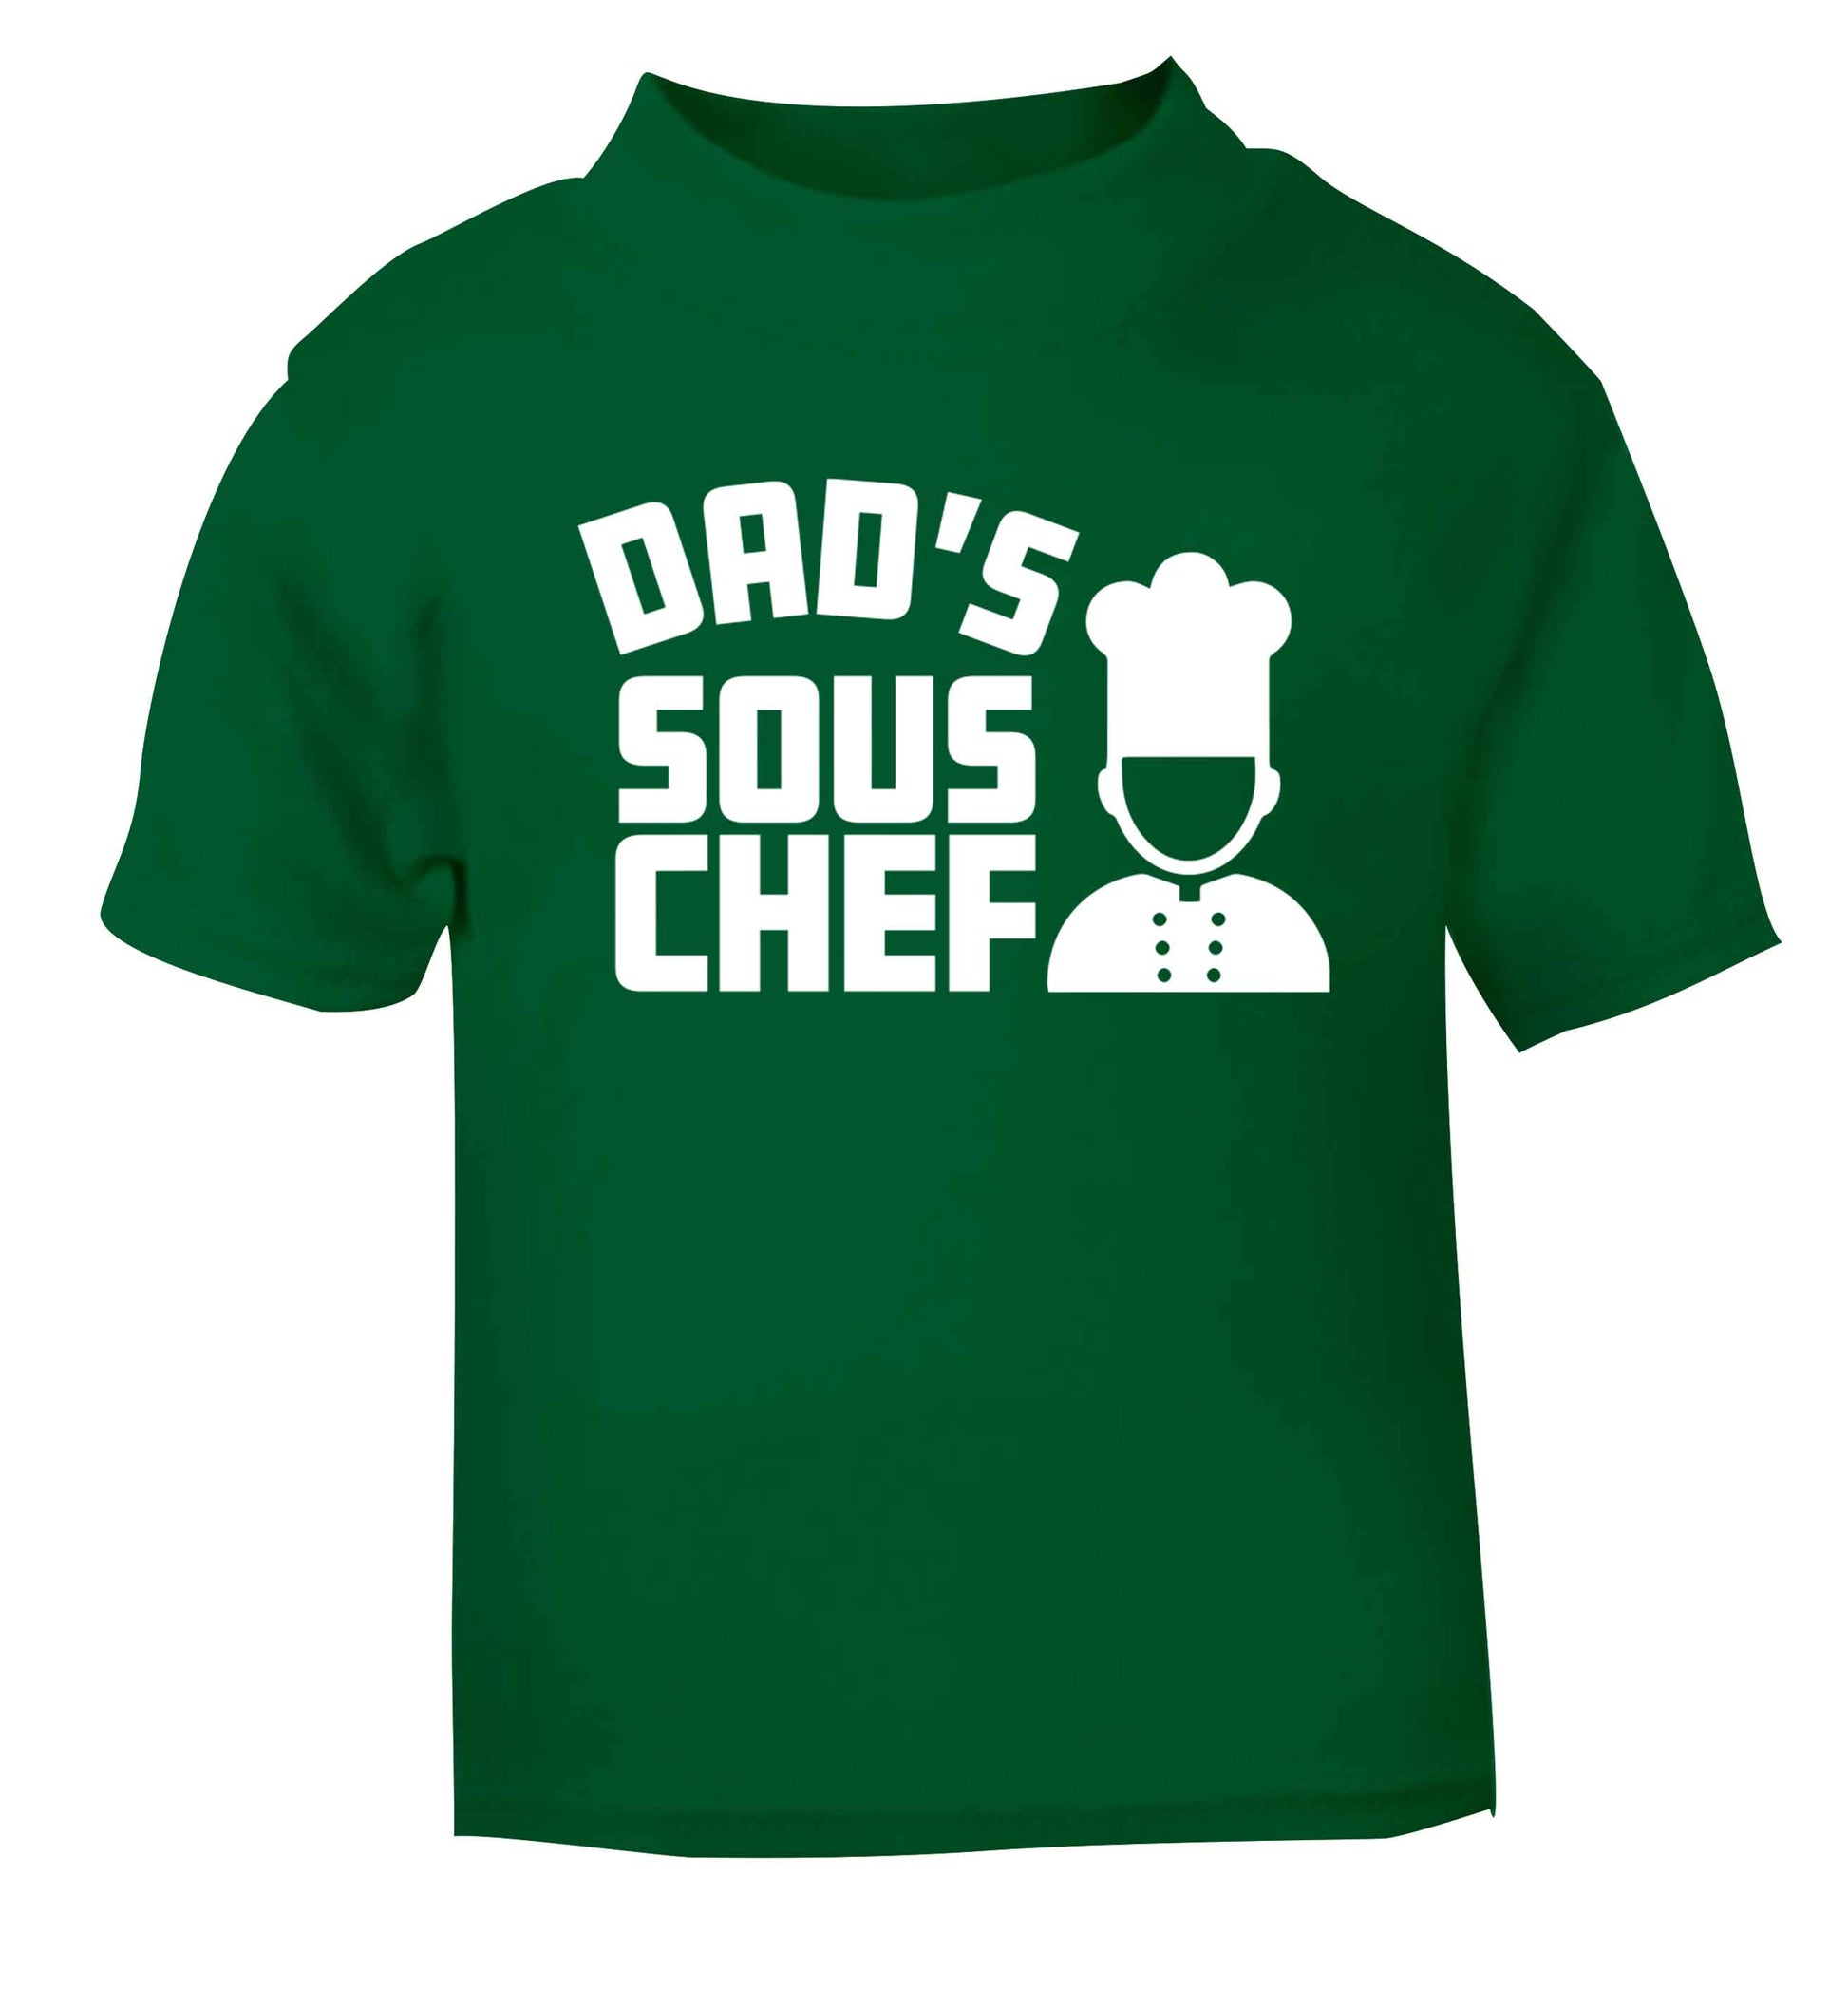 Dad's sous chef green baby toddler Tshirt 2 Years